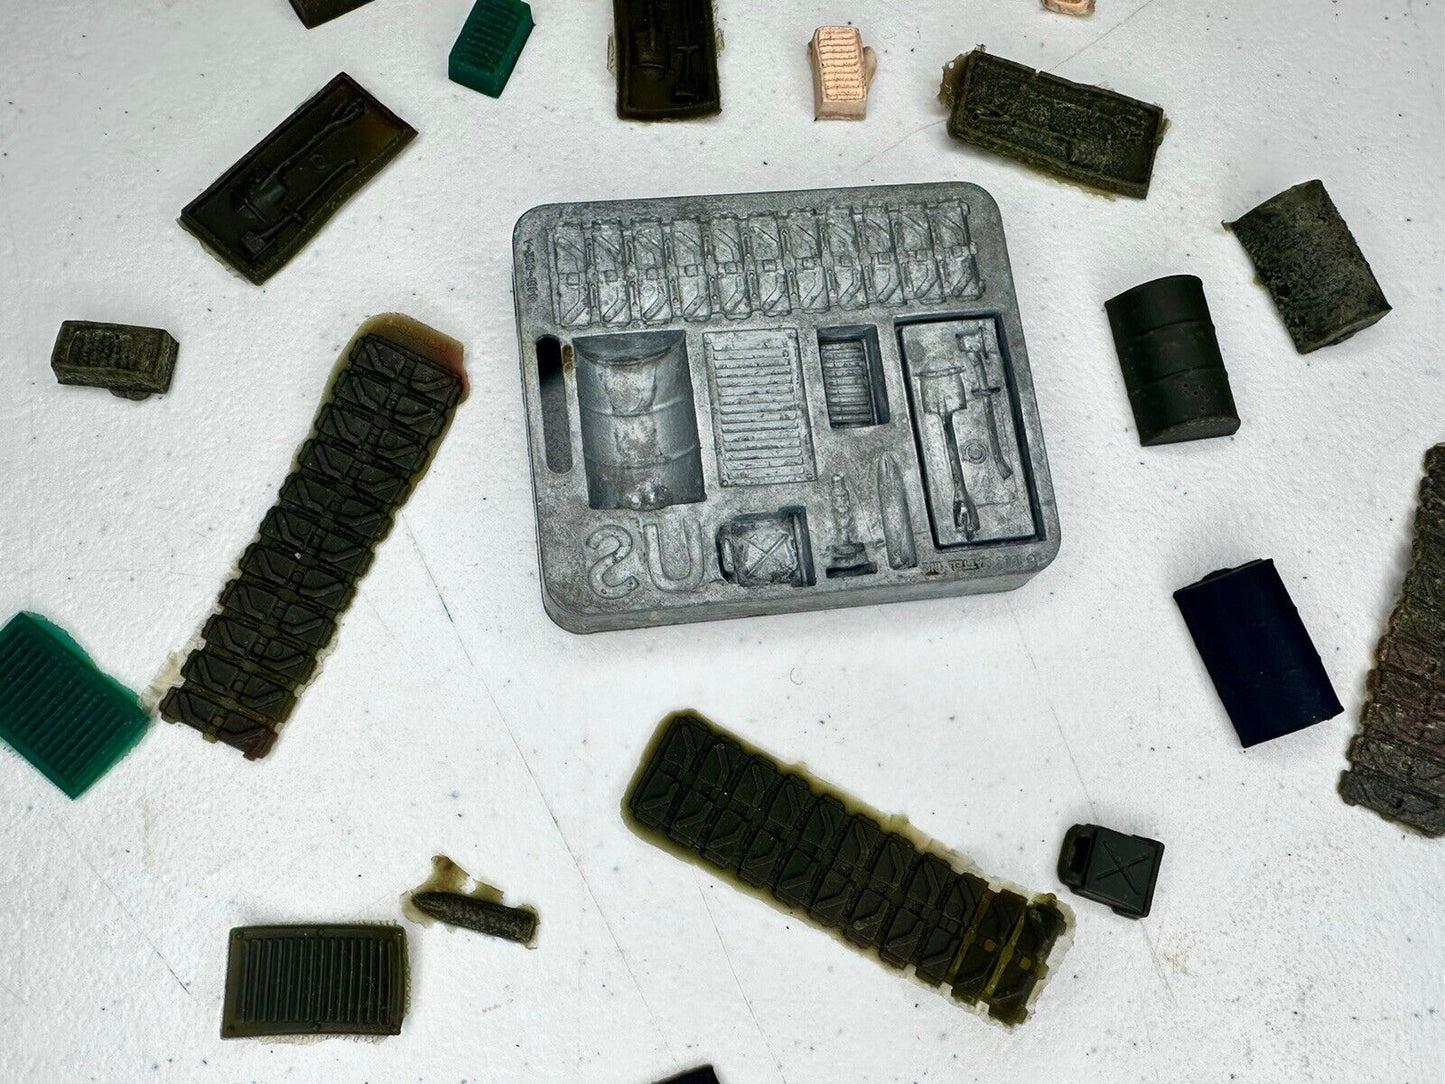 Vintage Mattel Army Thingmaker Diecast Mold Set - Rare Complete Collectible with Original Parts - TreasuTiques